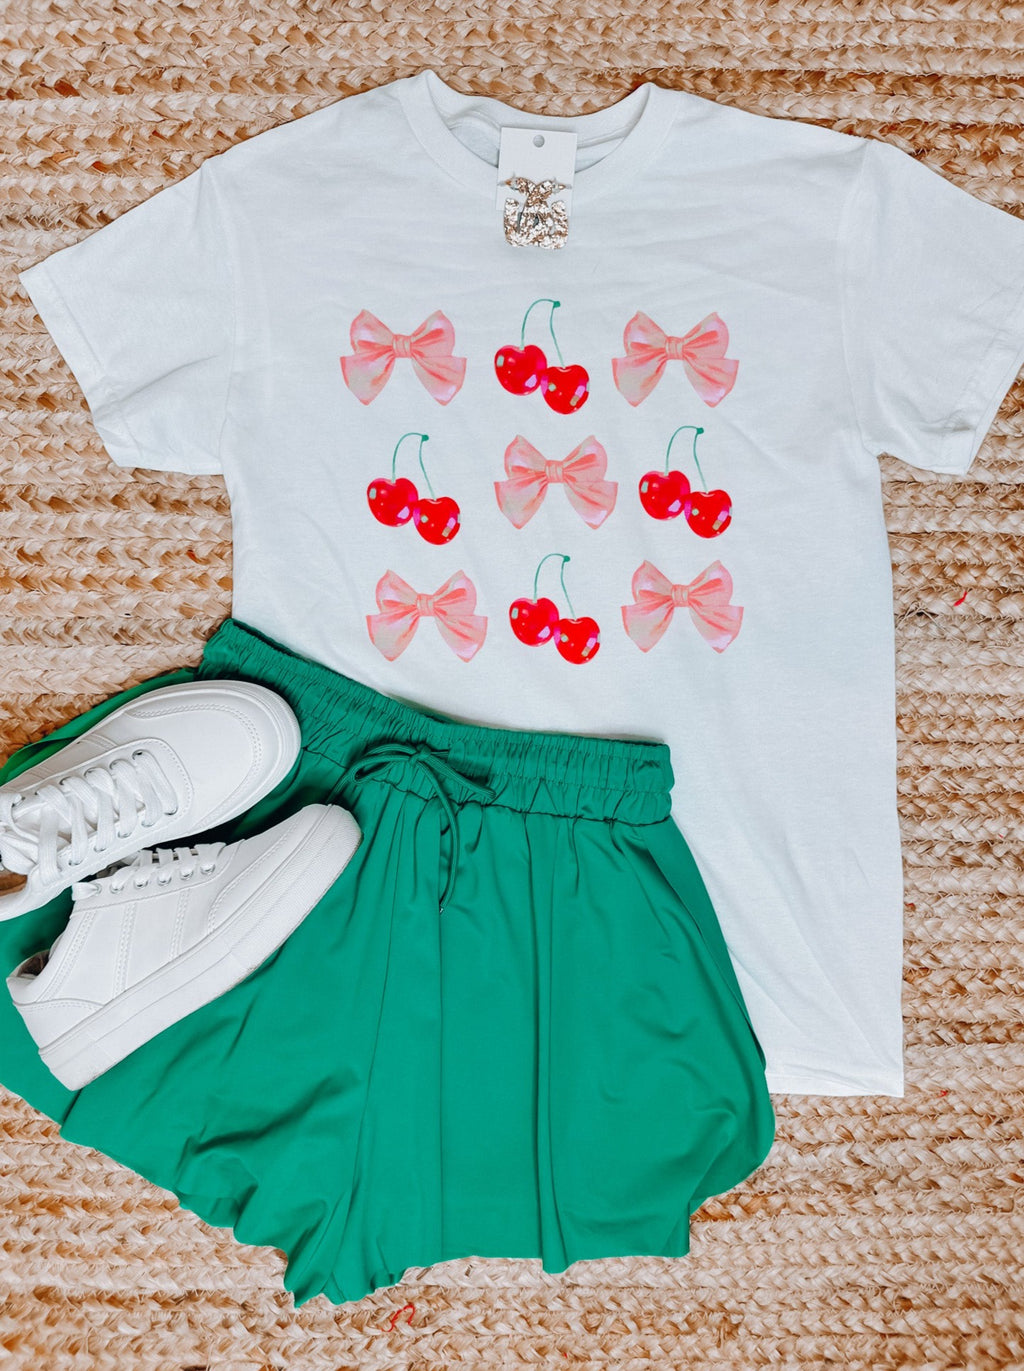 Cherries Bow Grid Graphic Tee (S-2XL)